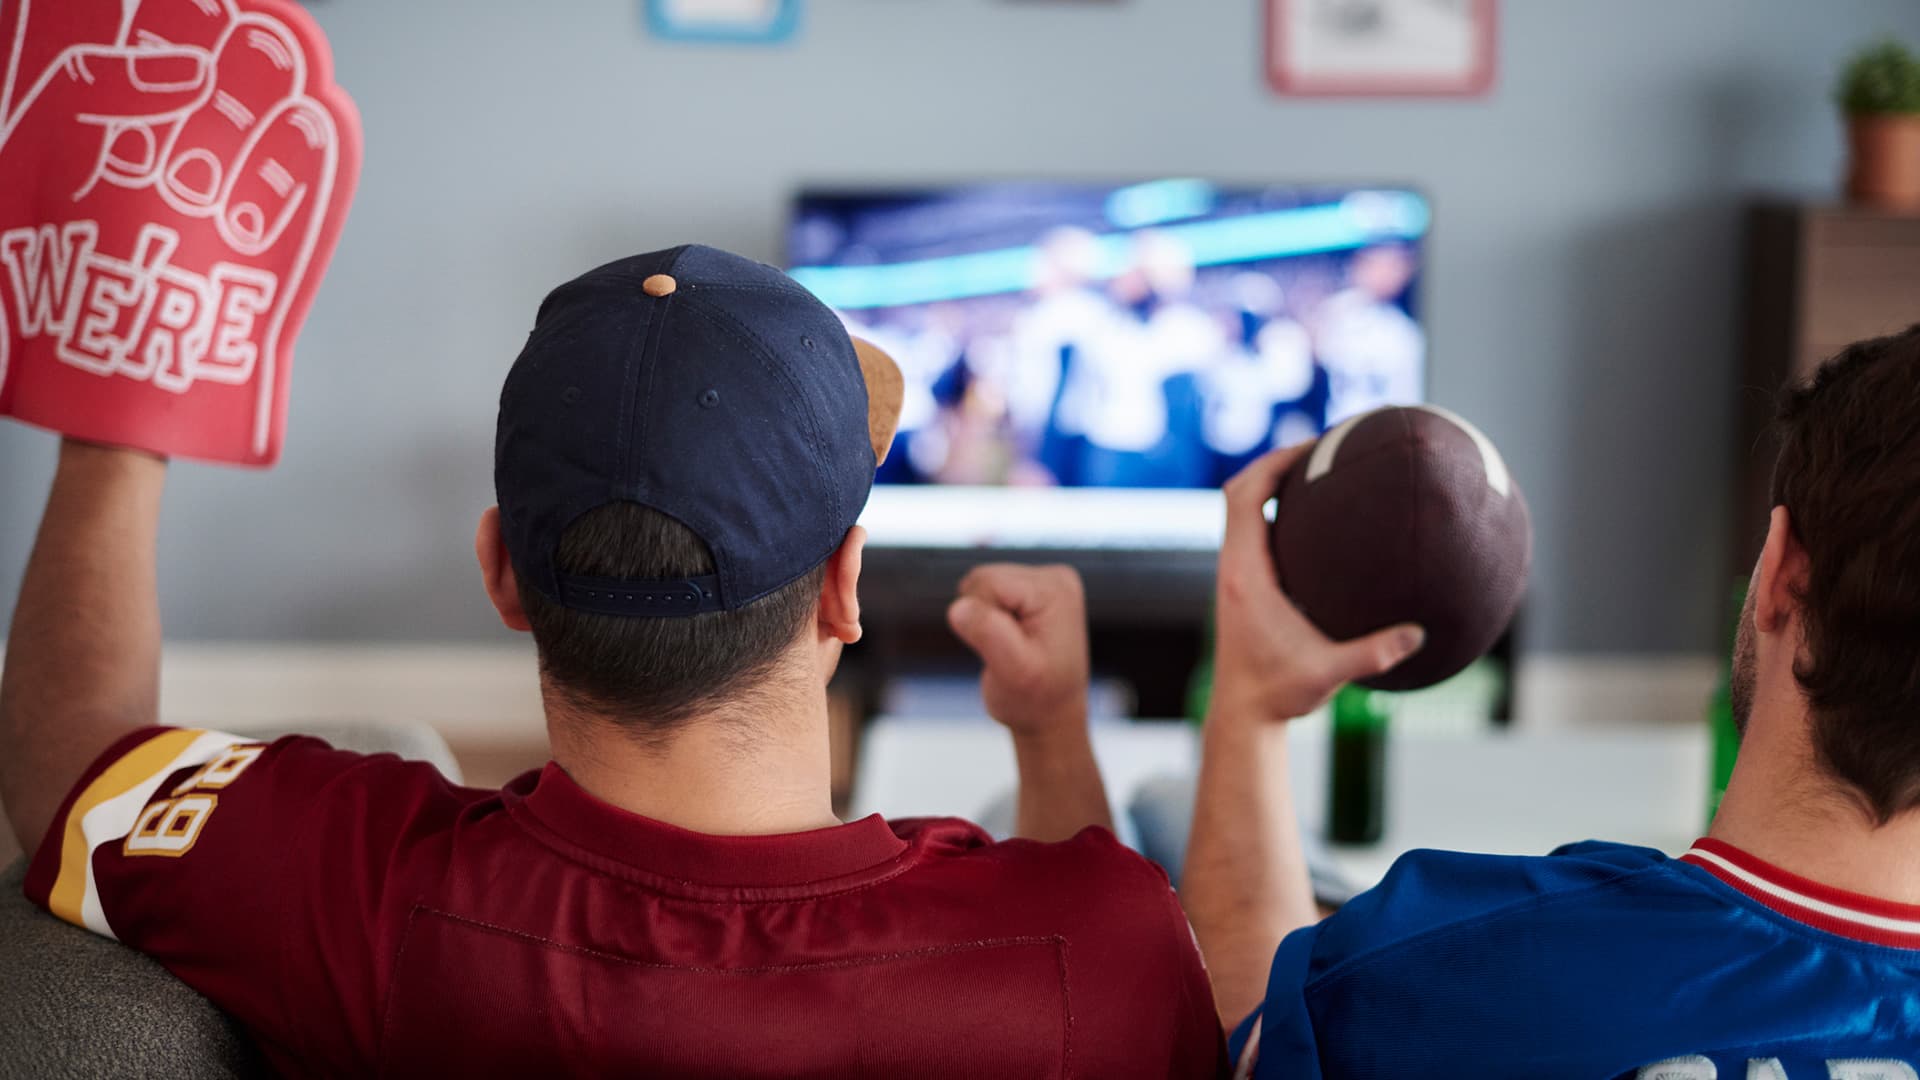 two men on couch excited watching football in jerseys